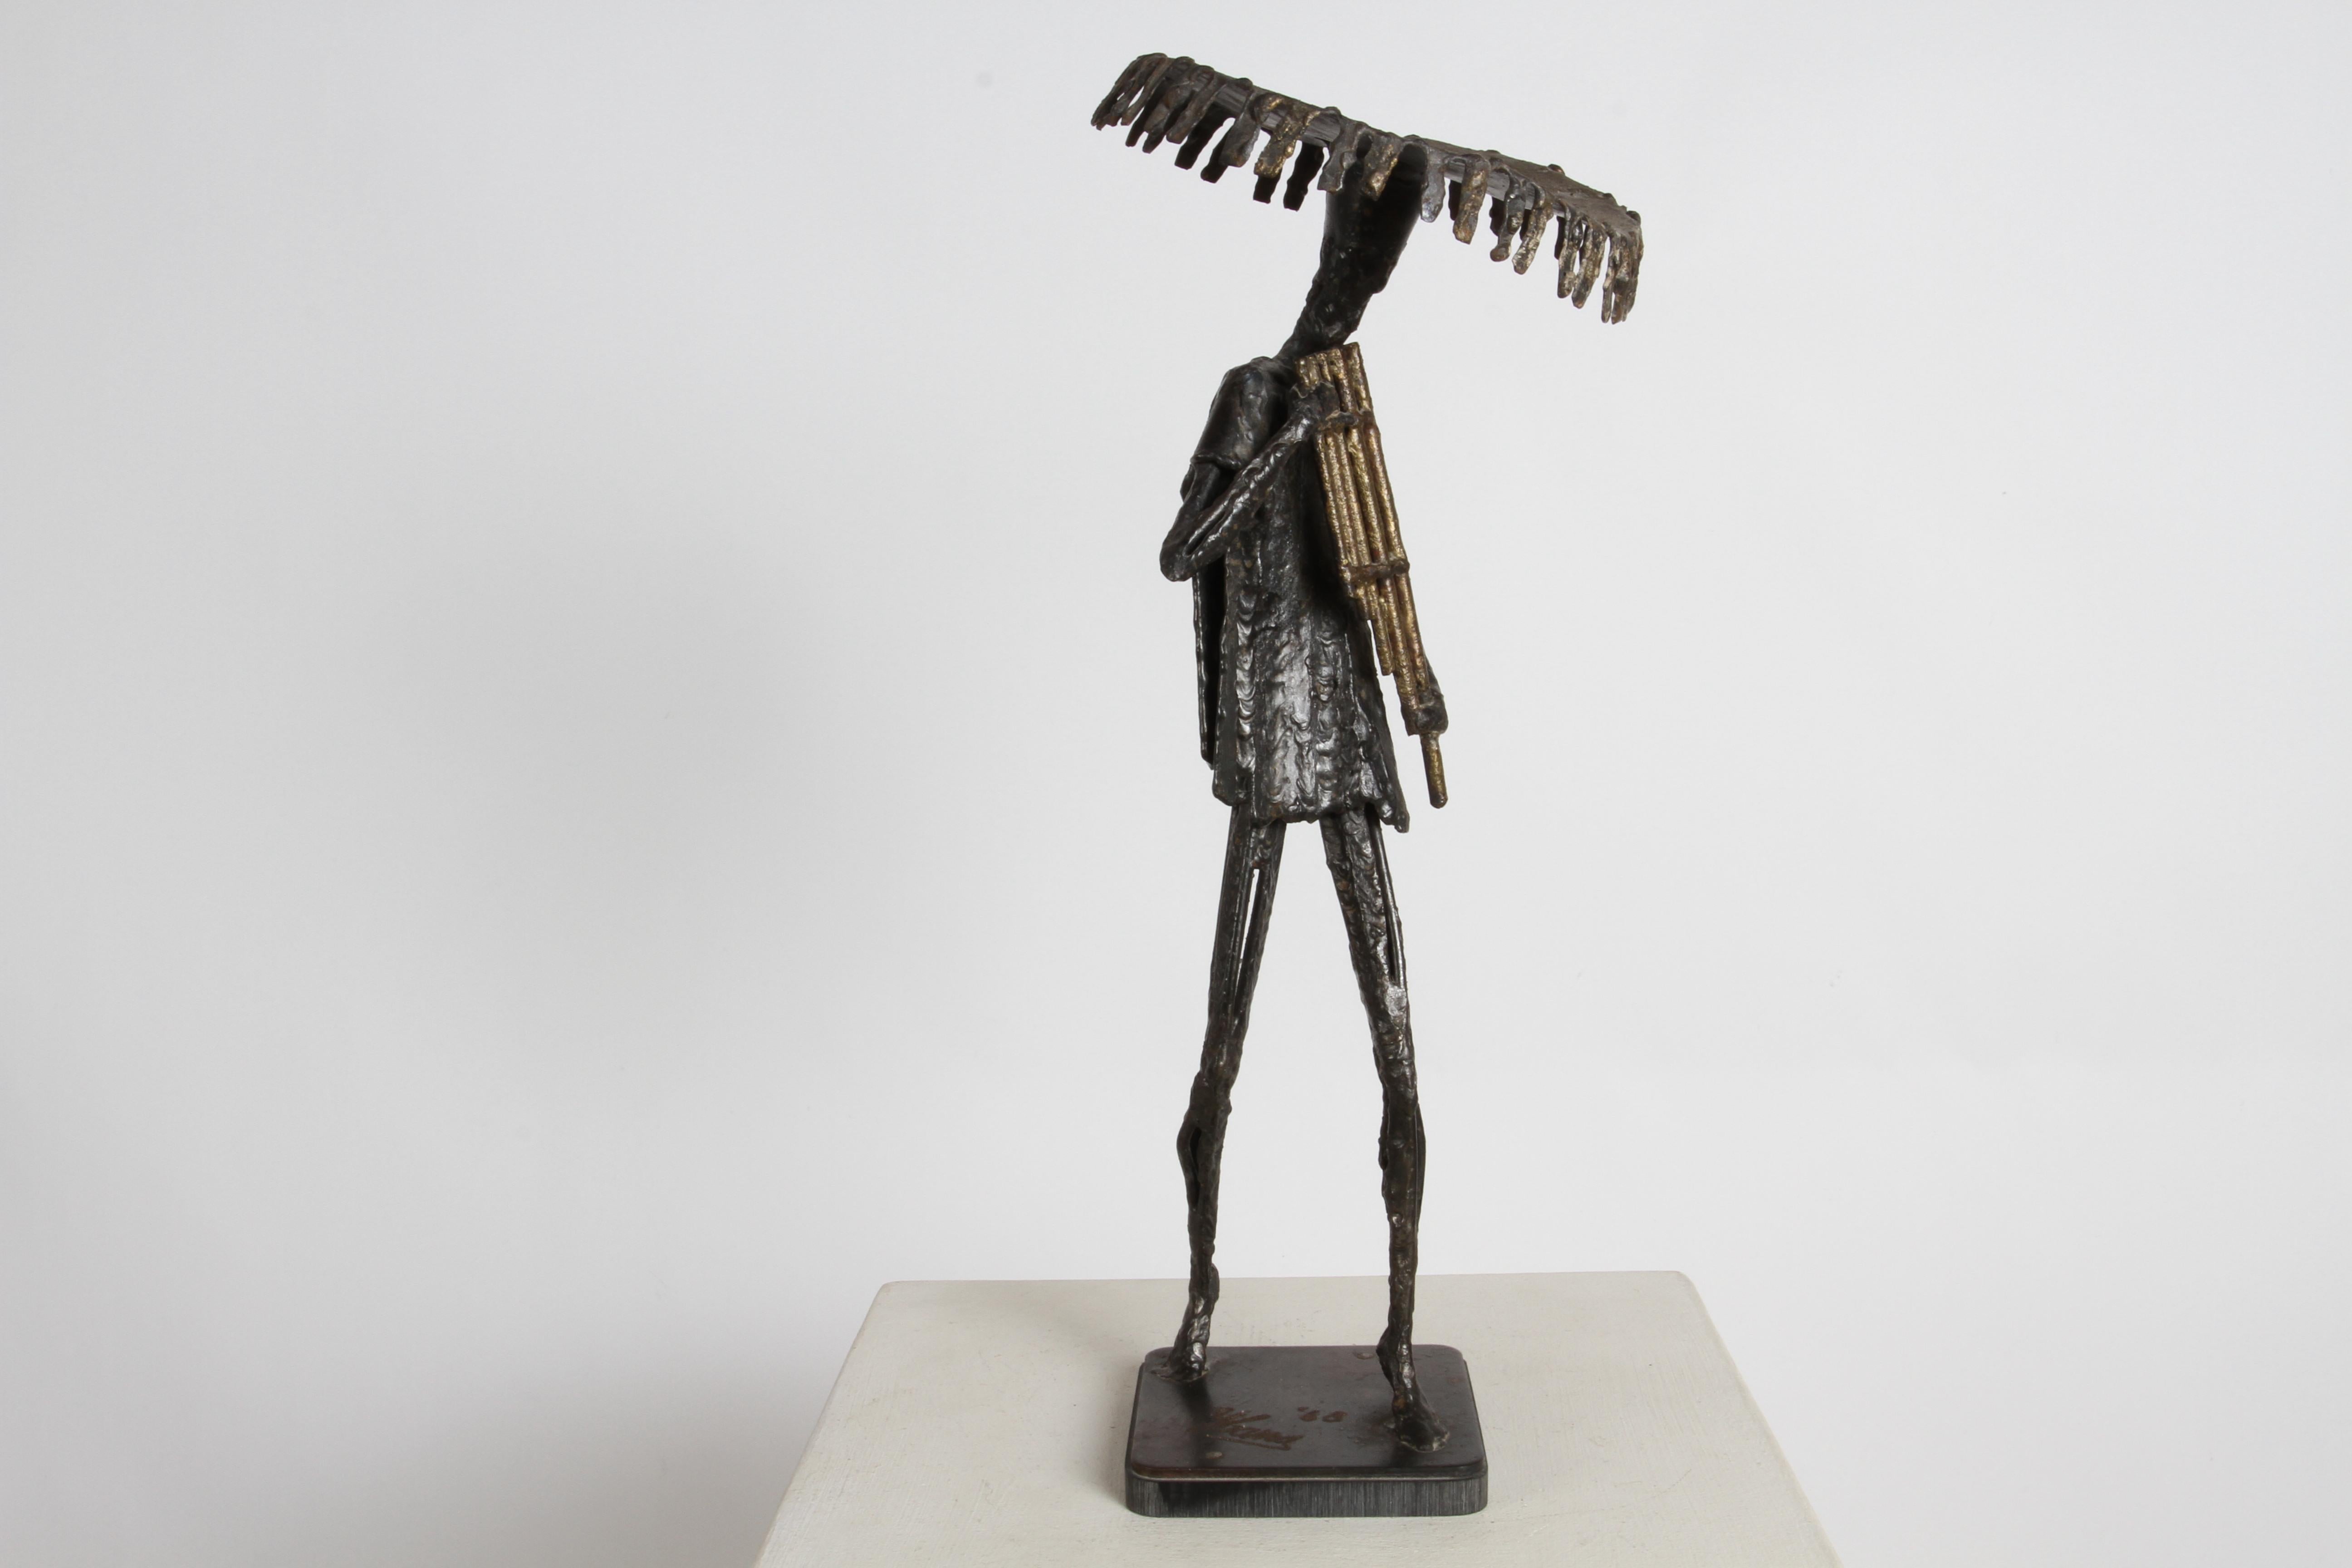 Mid-Century Mexican Modern Brutalist figurative sculpture of a pan flutist with large sombrero by Mexican / American artist Simon Ybarra (1913-2003). Signed on base Ybarra '68. Welded figure with brass brazing holding a pan flute on square base. In